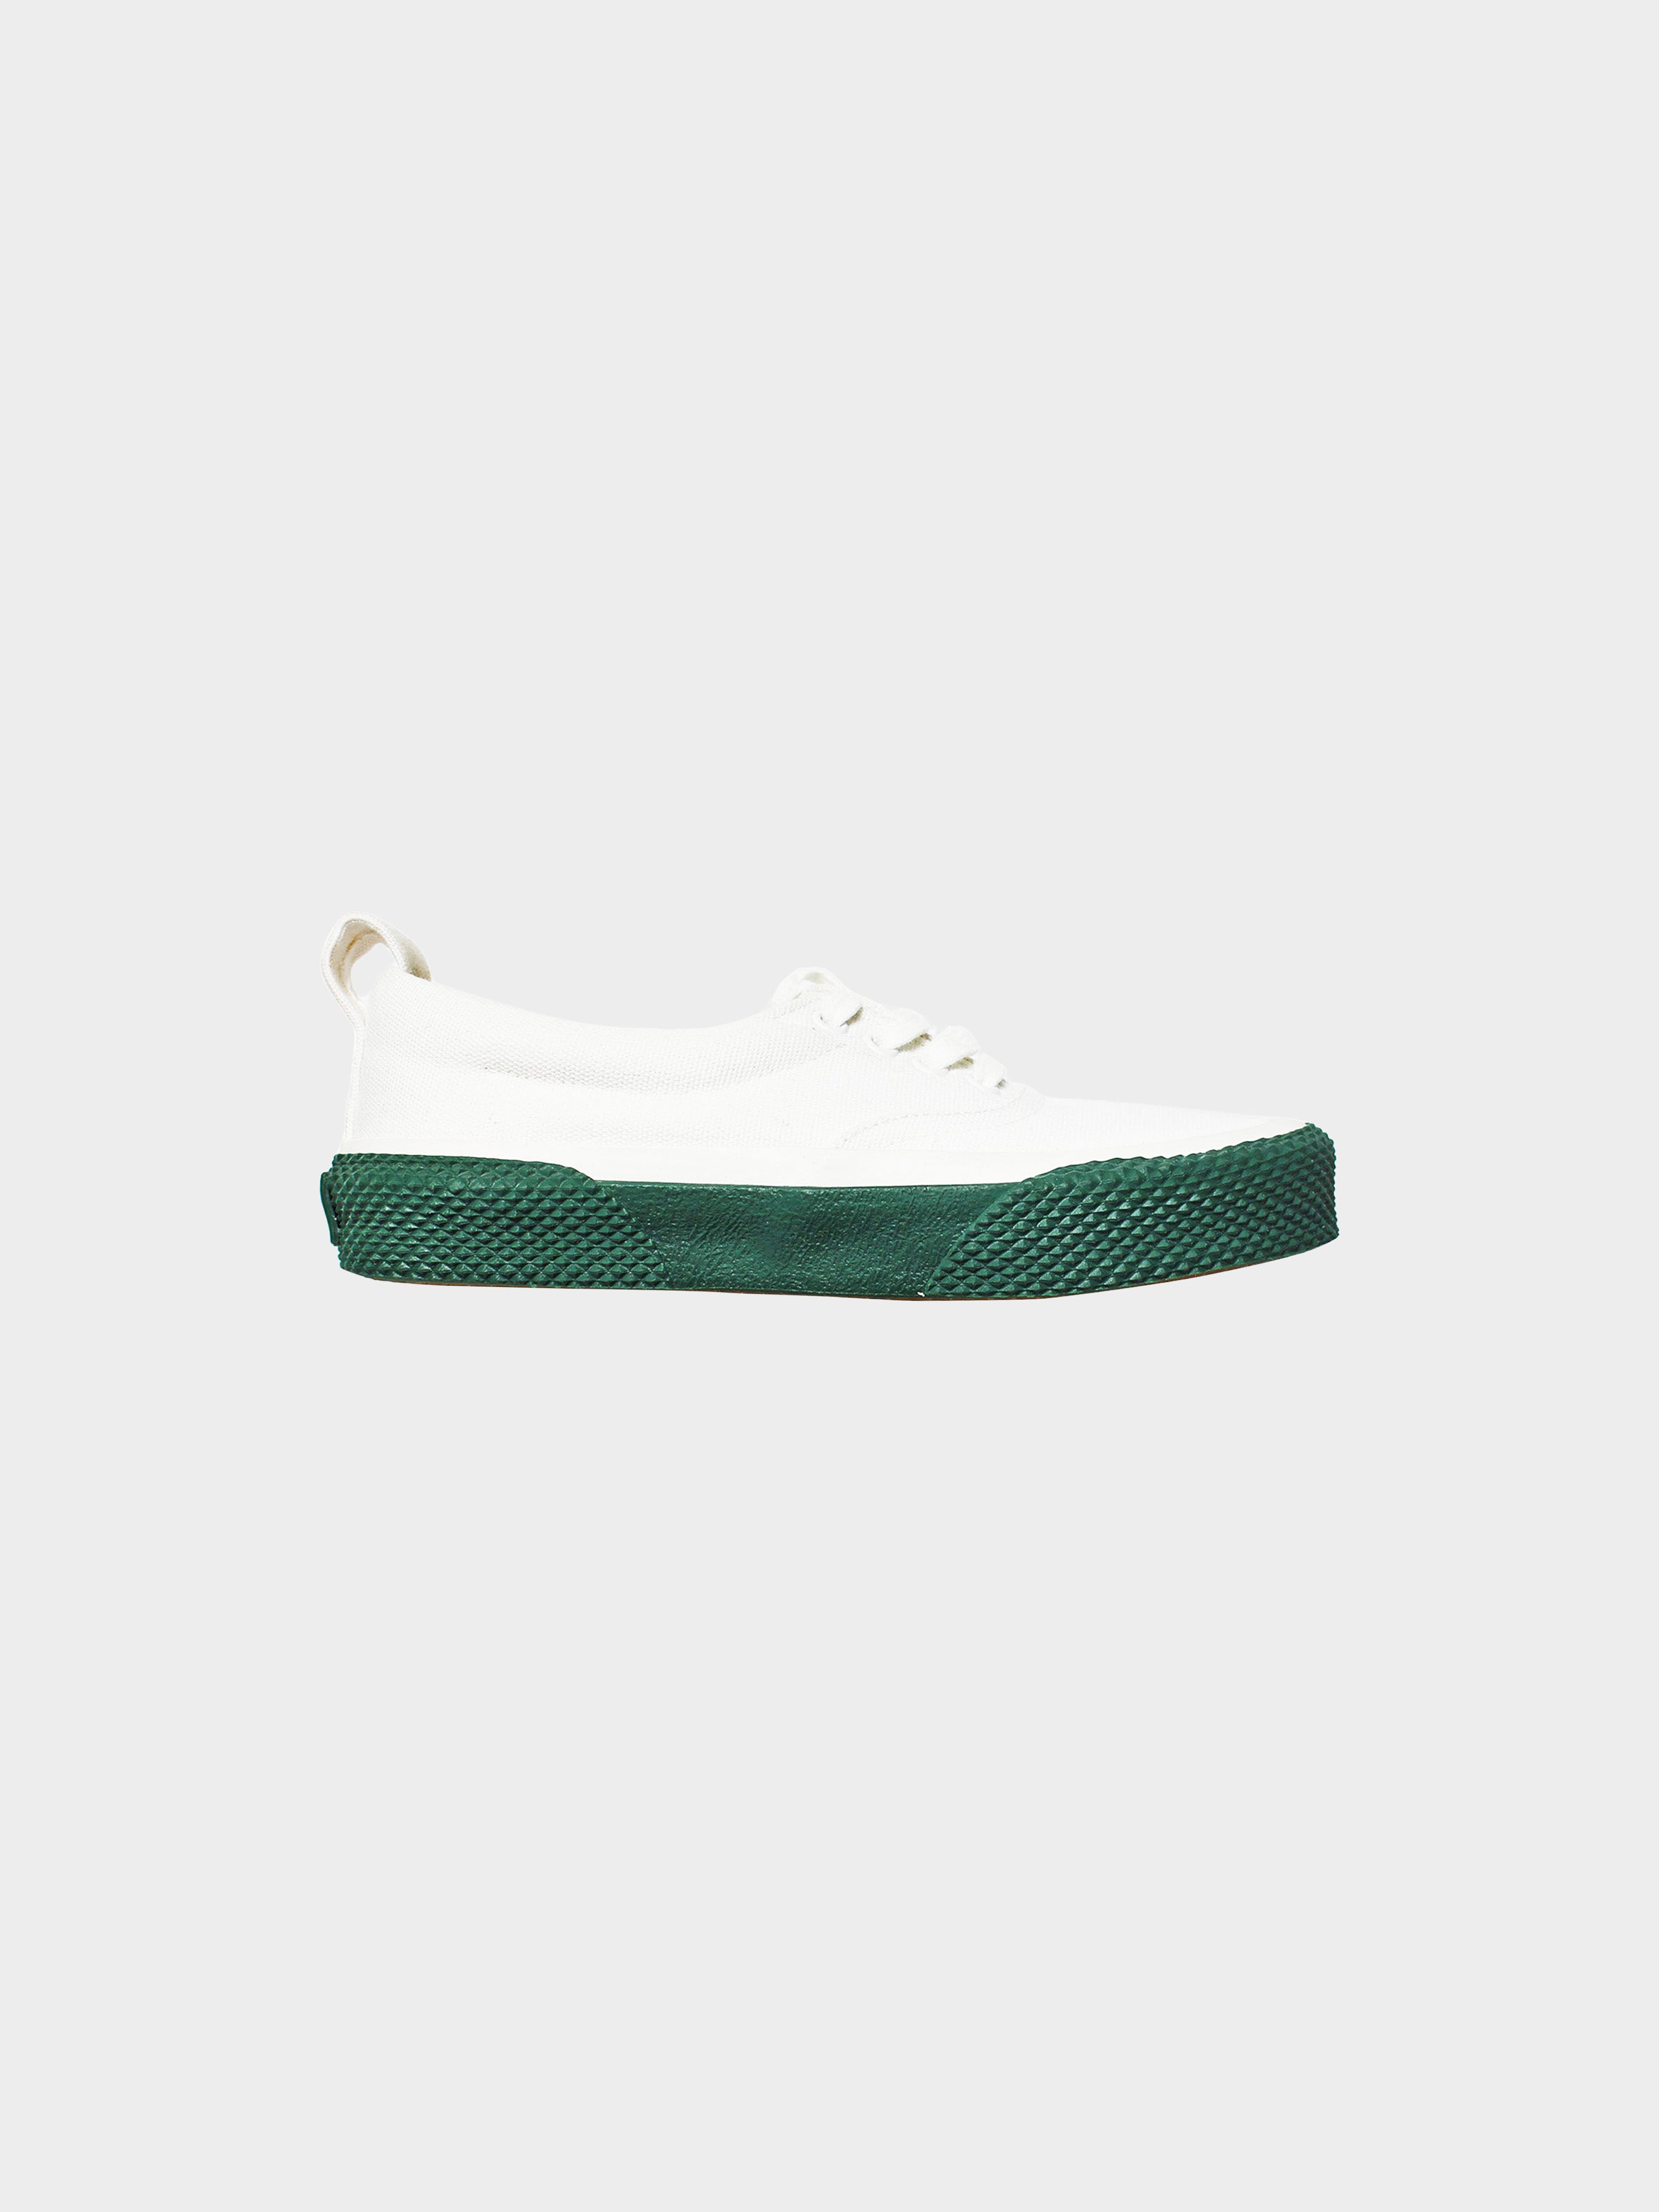 Céline by Phoebe Philo 2017 Lace Up Sneakers